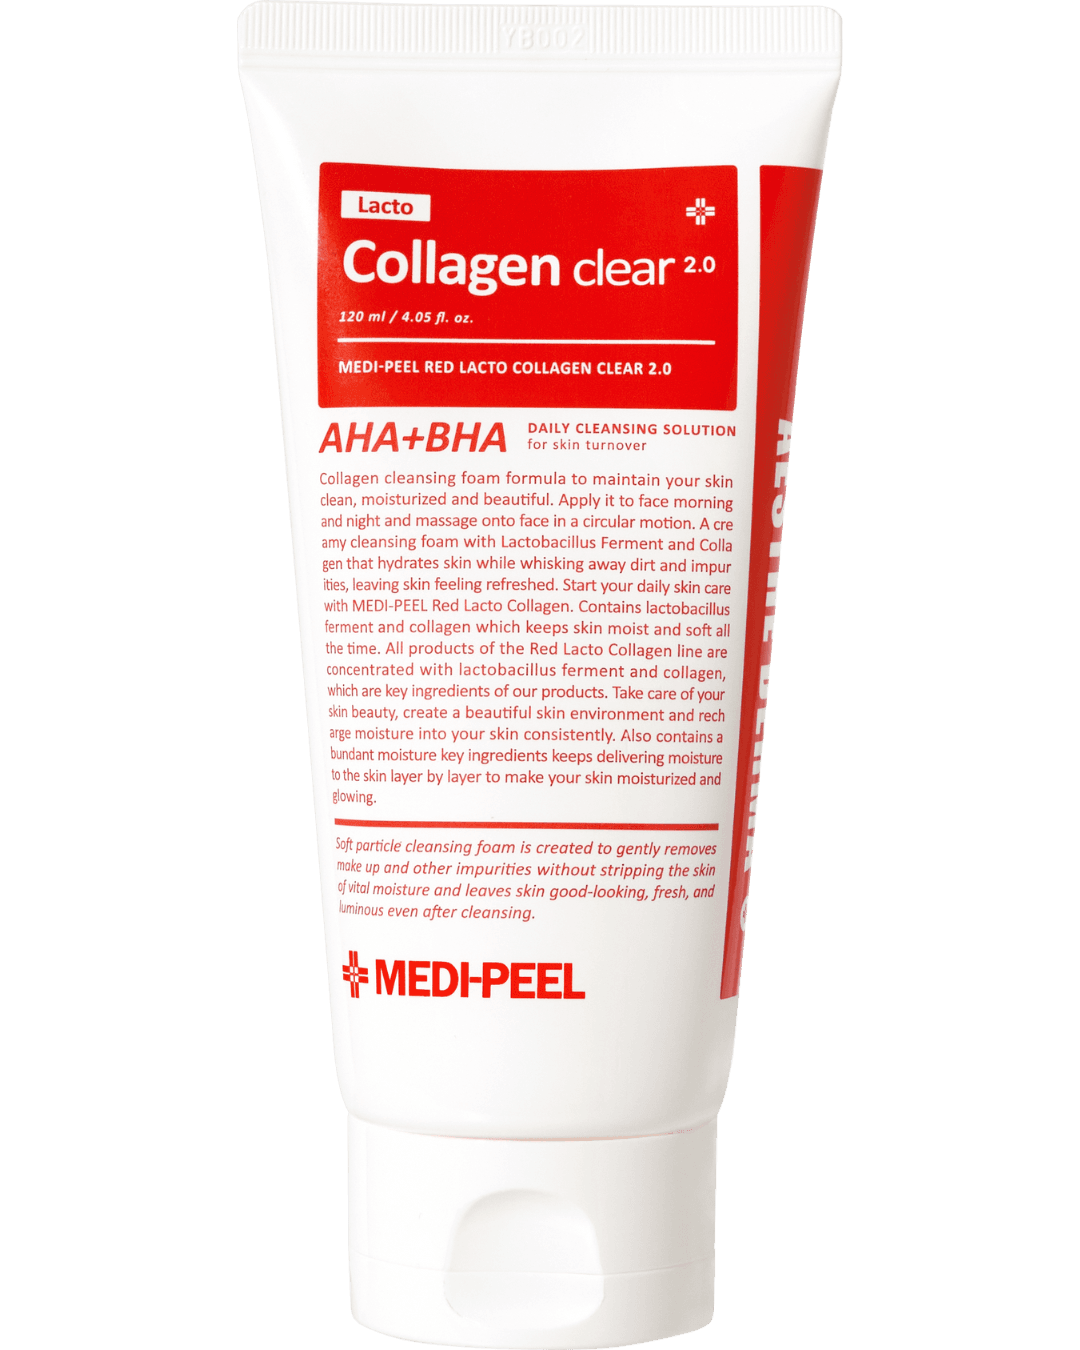 MEDIPEEL Red Lacto Collagen Clear 2.0